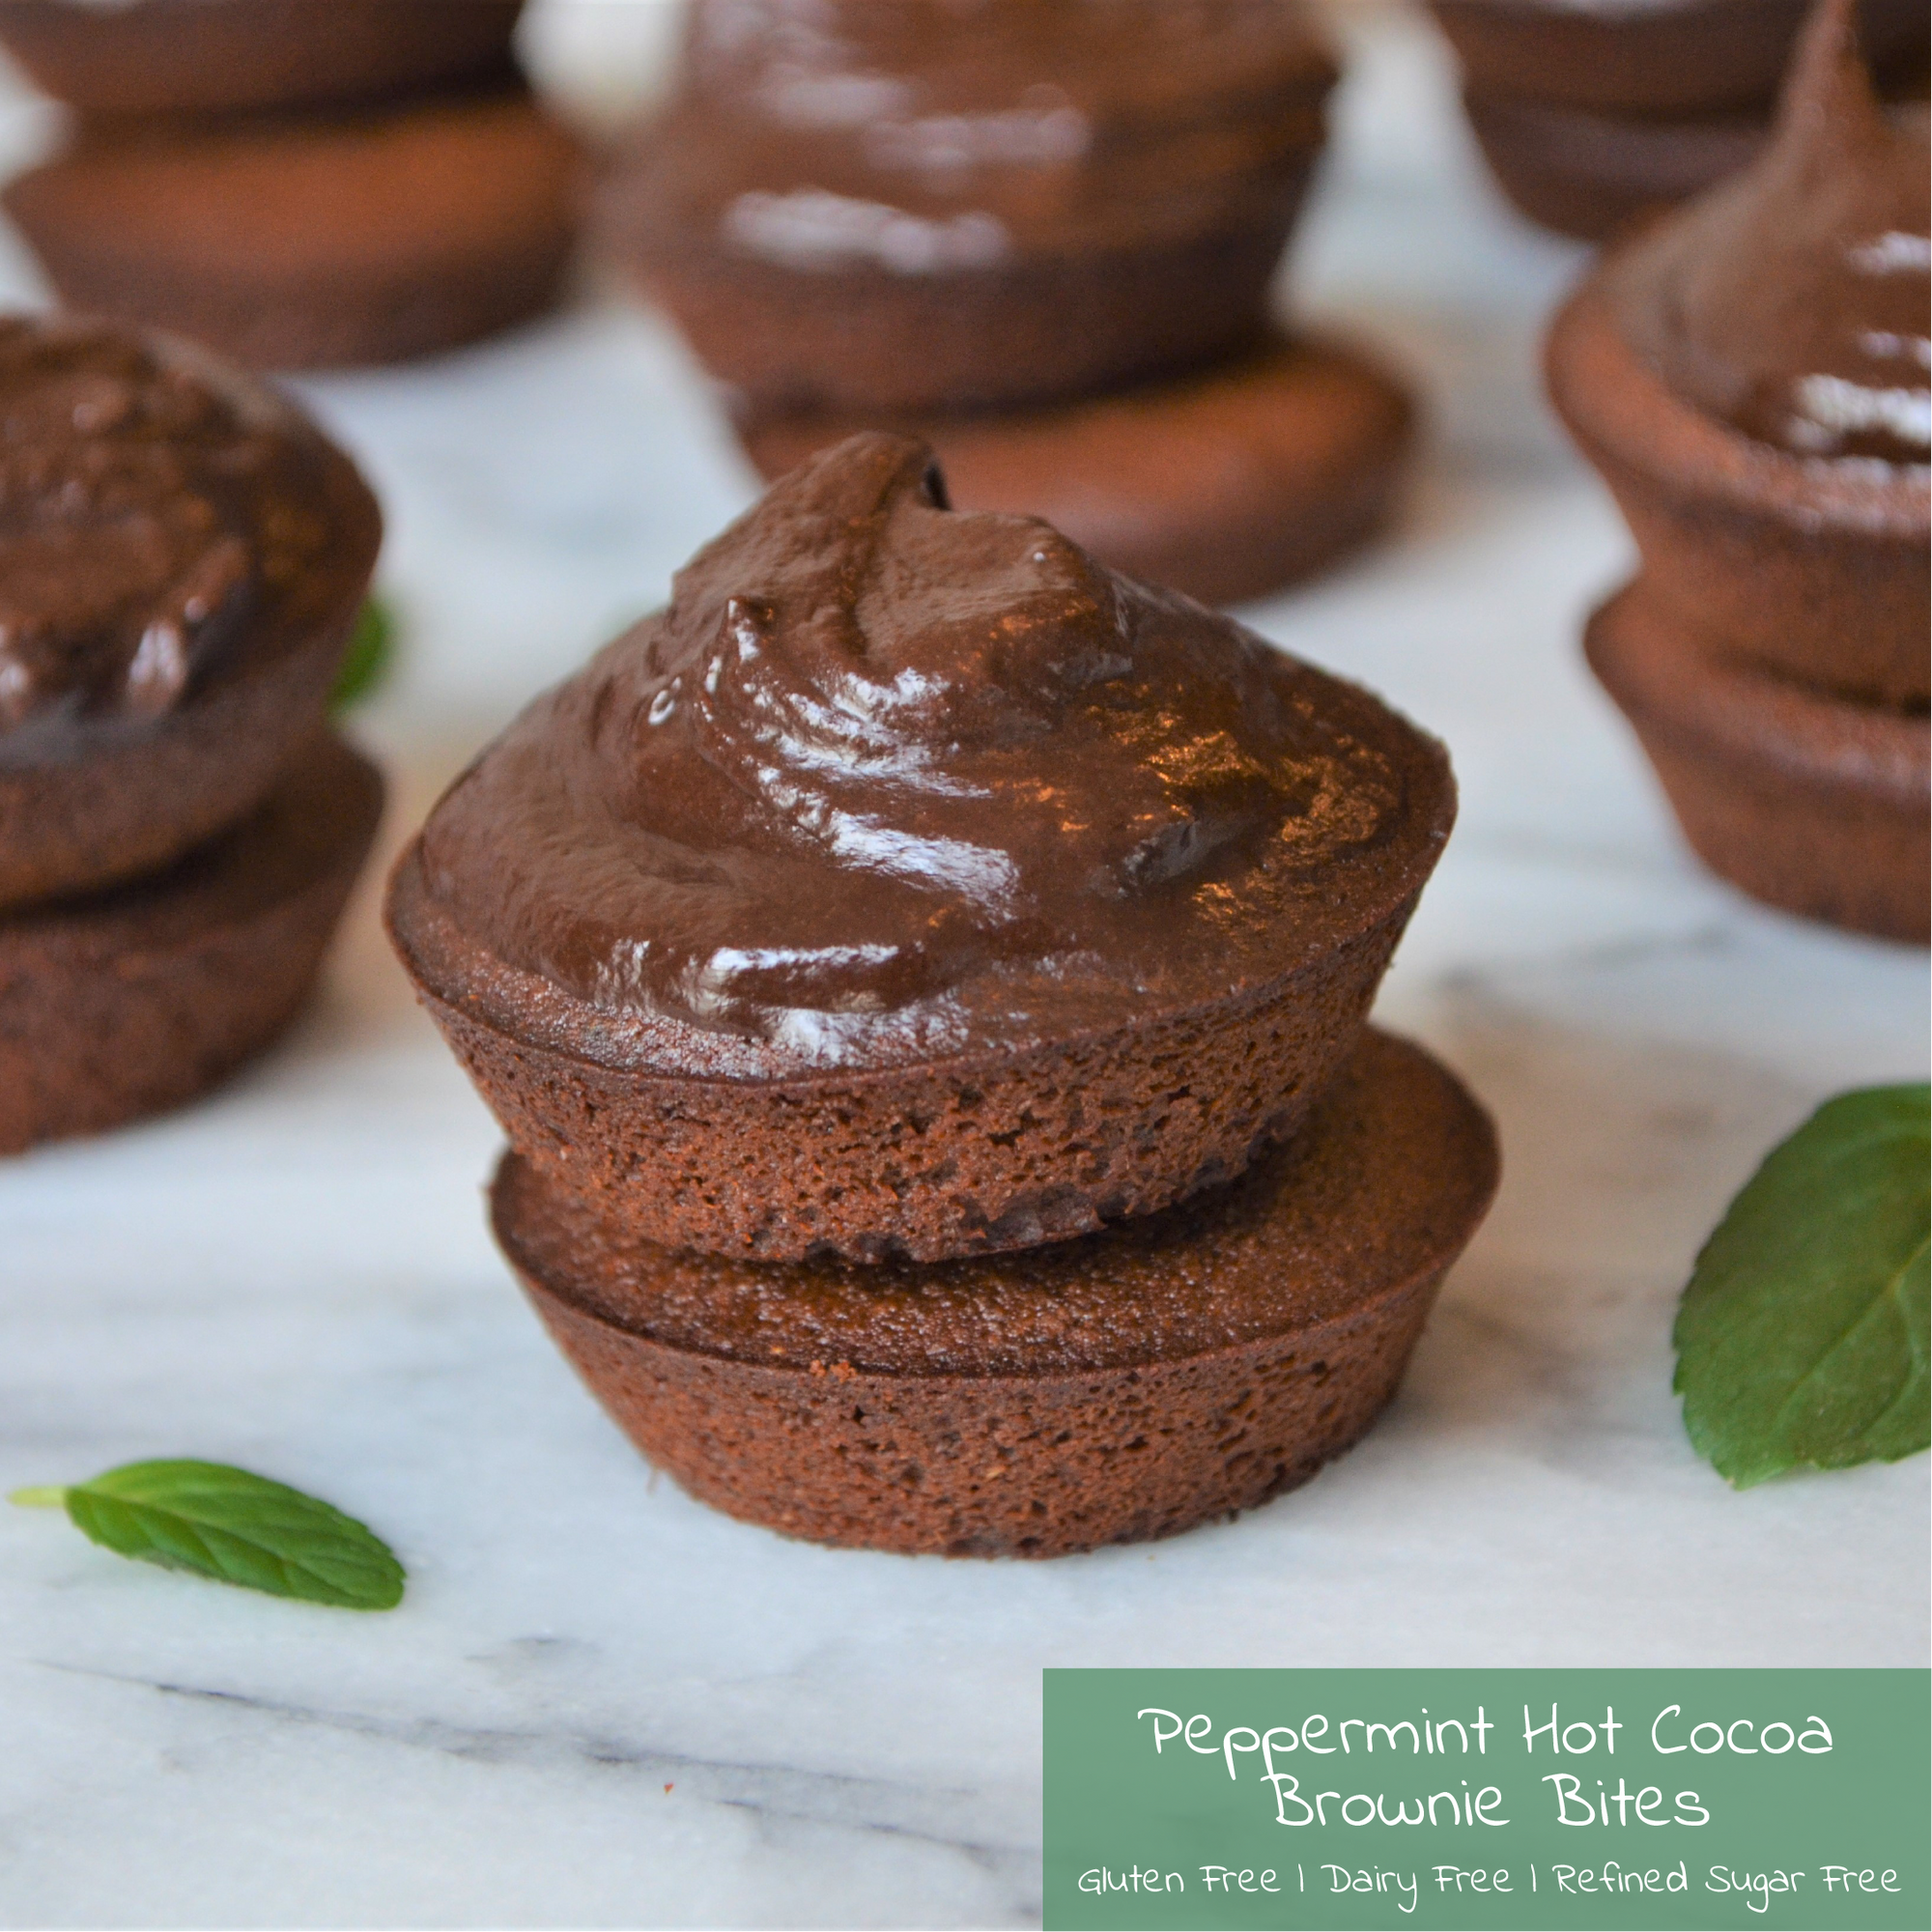 Peppermint Hot Cocoa Brownie Bites